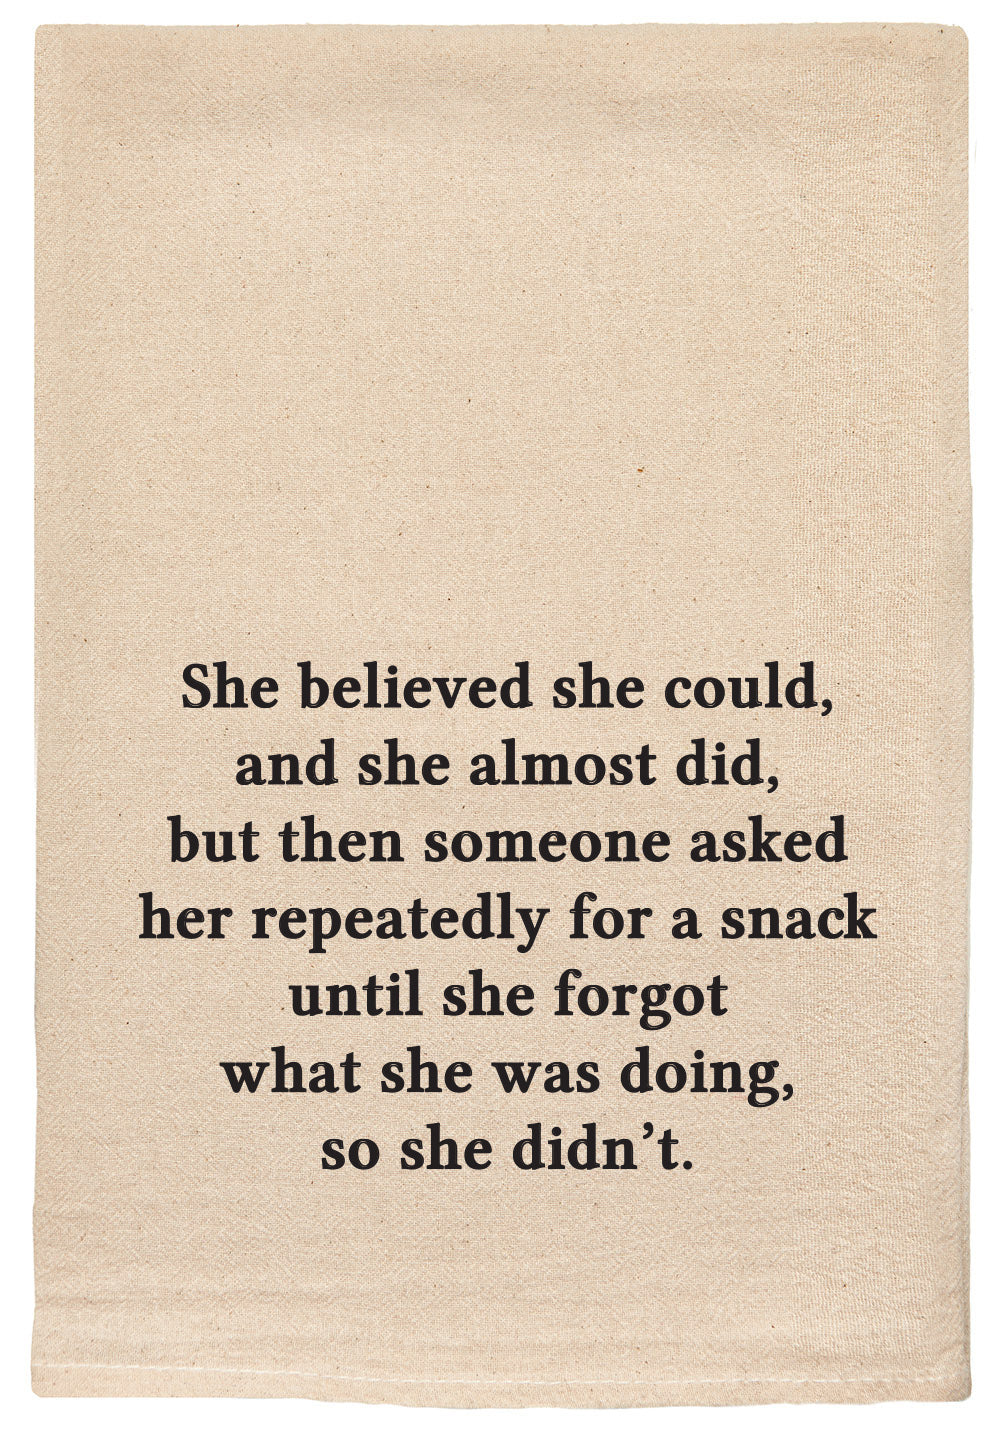 She believed she could and she almost did, but then someone asked her repeatedly for a snack until she forgot what she was doing, so she didn't.